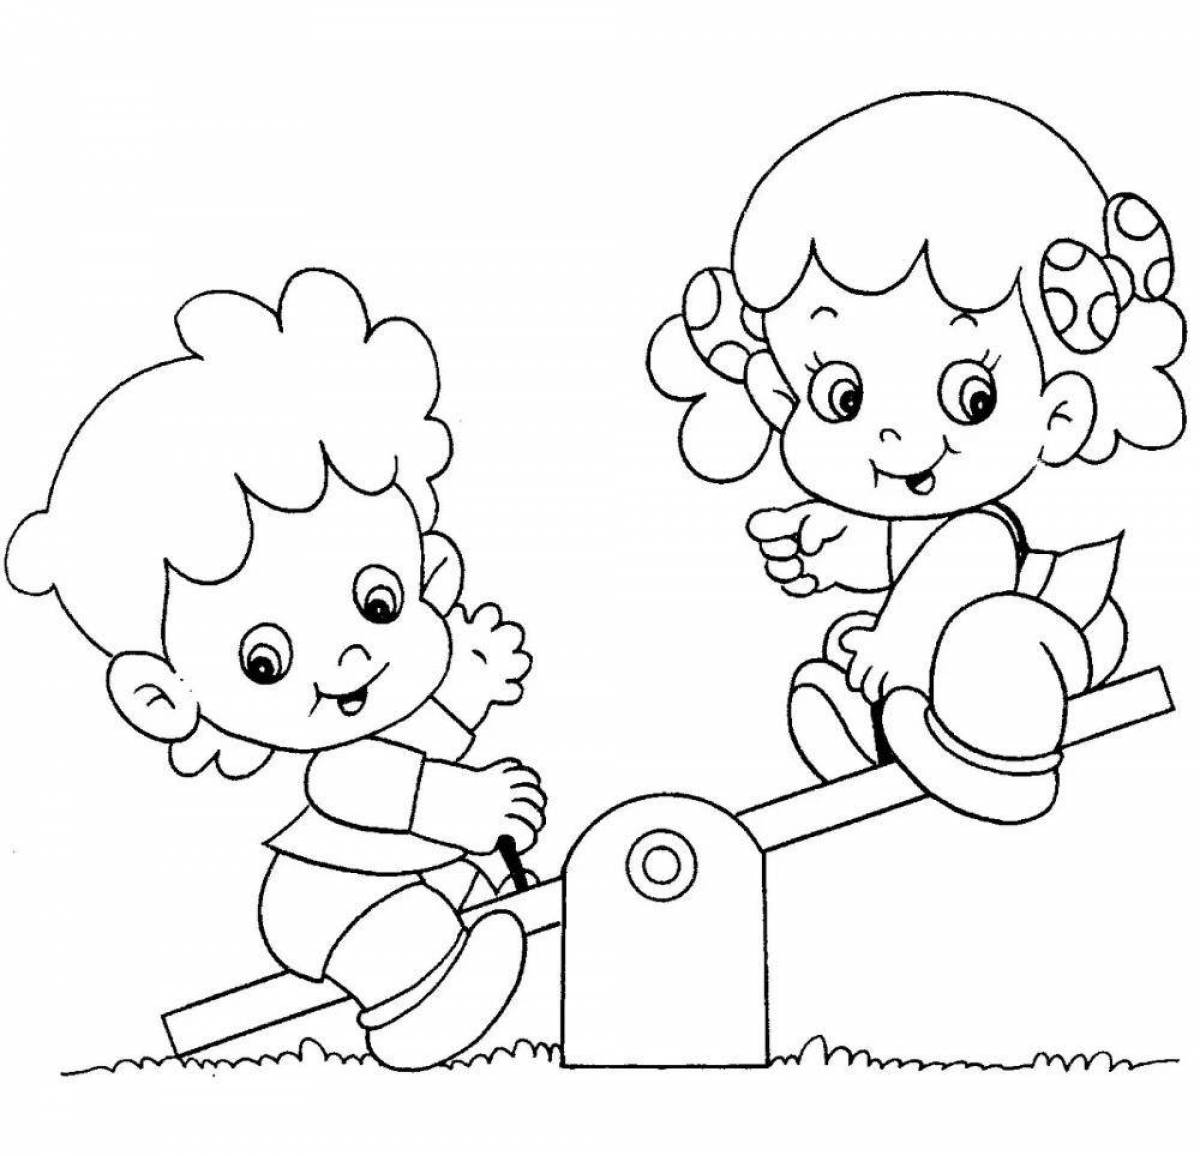 Children's rights coloring page